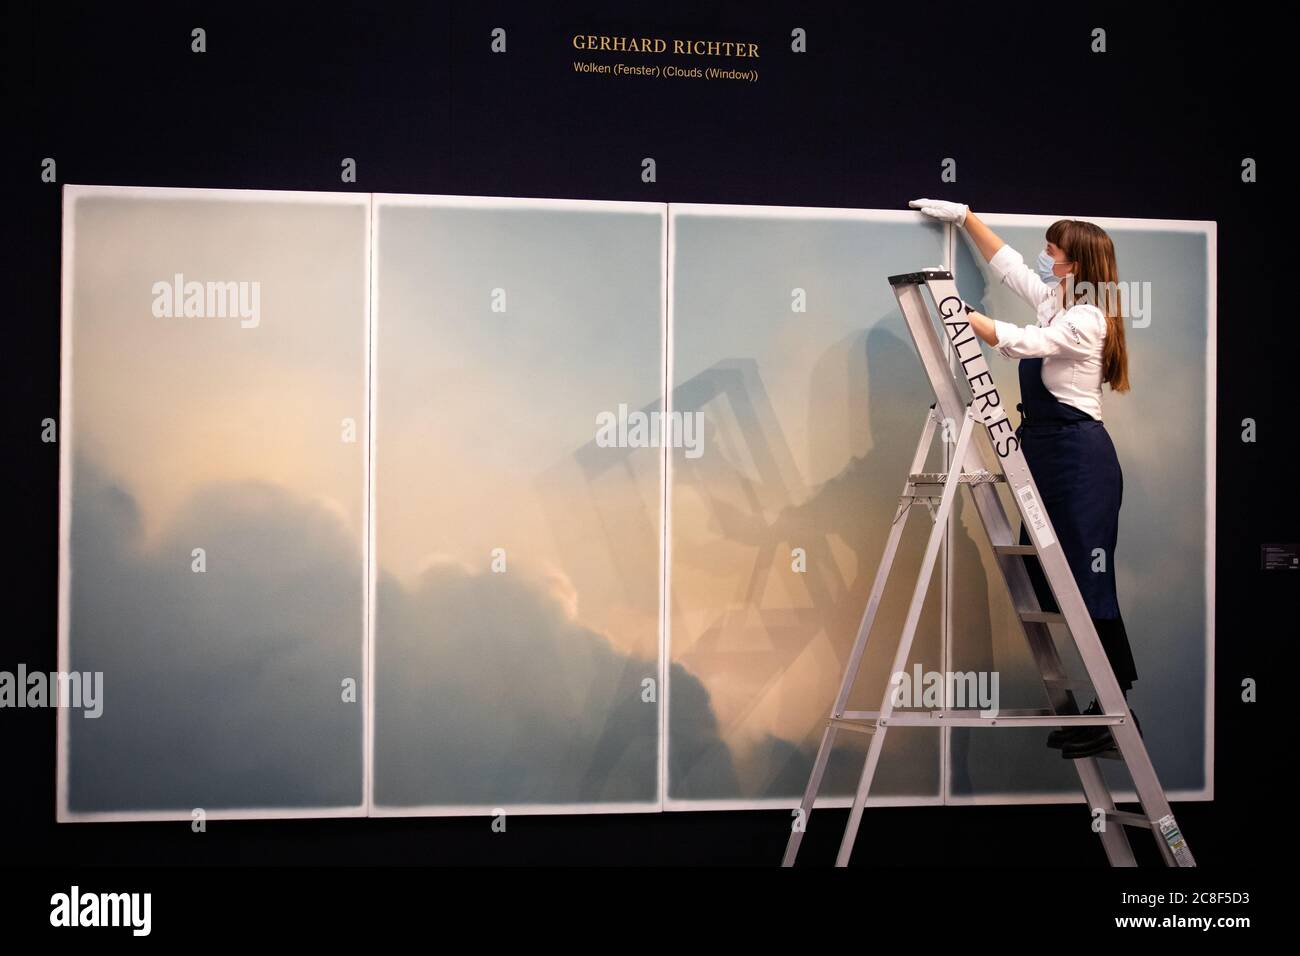 A gallery assistant in front of Wolken (fenster) (Clouds (Window)) by Gerhard Richter, 1970, oil on canvas with an estimate of GBP 9-12 million during a press preview at Sotheby's in London ahead of their 'From Rembrandt to Richter' sale on July 28. Stock Photo